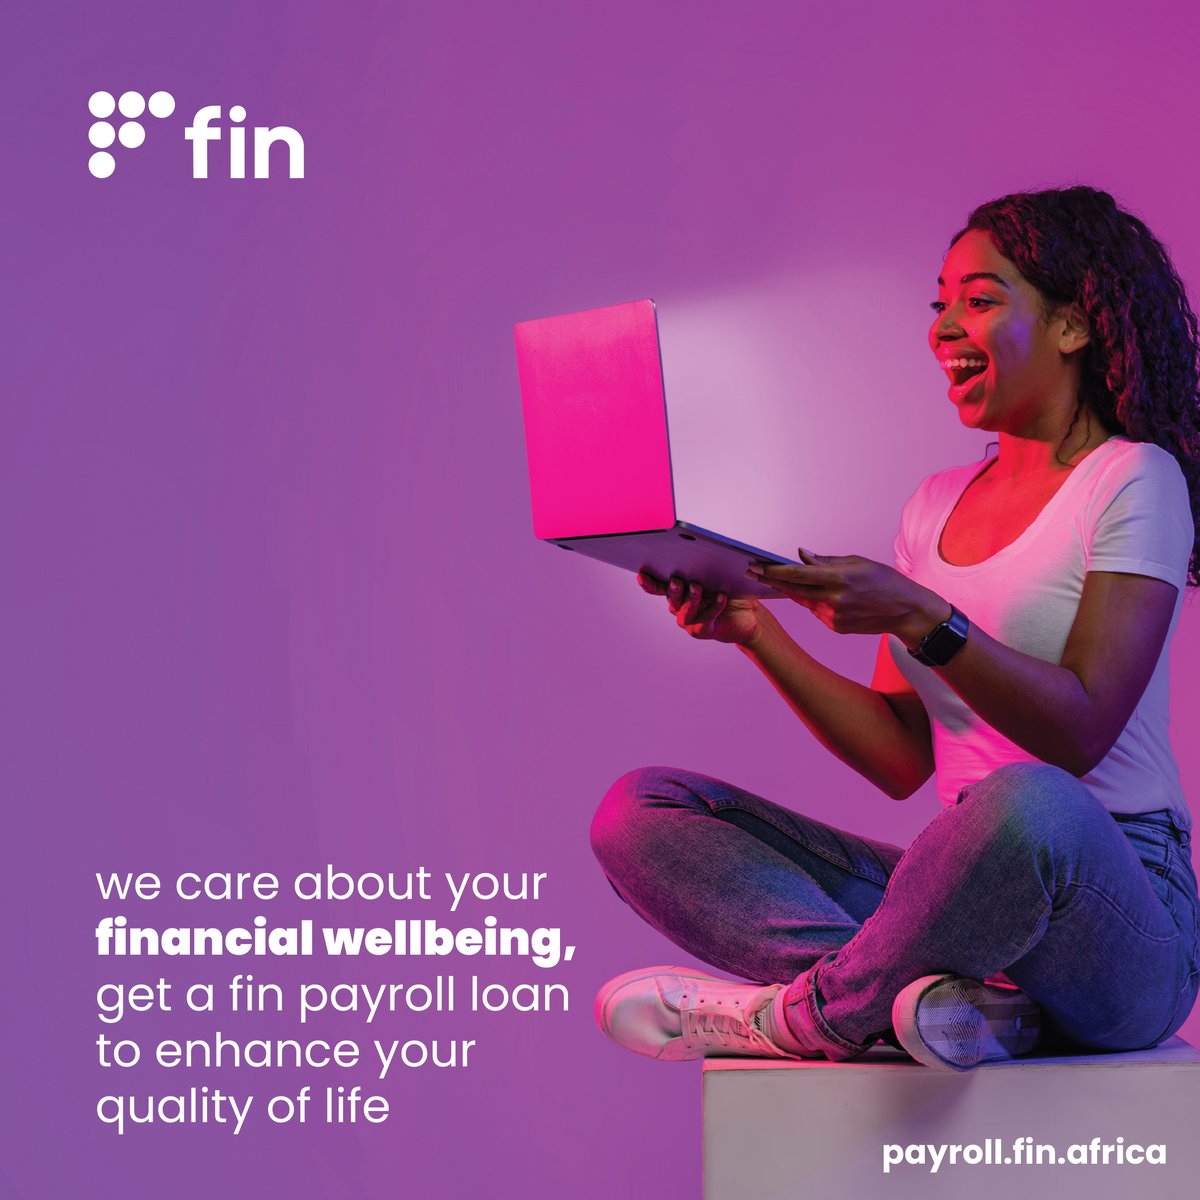 At Fin, your financial well-being is our priority. Take advantage of our Payroll Loans to elevate your lifestyle and unlock new opportunities.
 
#FinPayrollLoans #FinancialWellbeing #EnhanceYourLife #Empowerment #ProsperityAhead